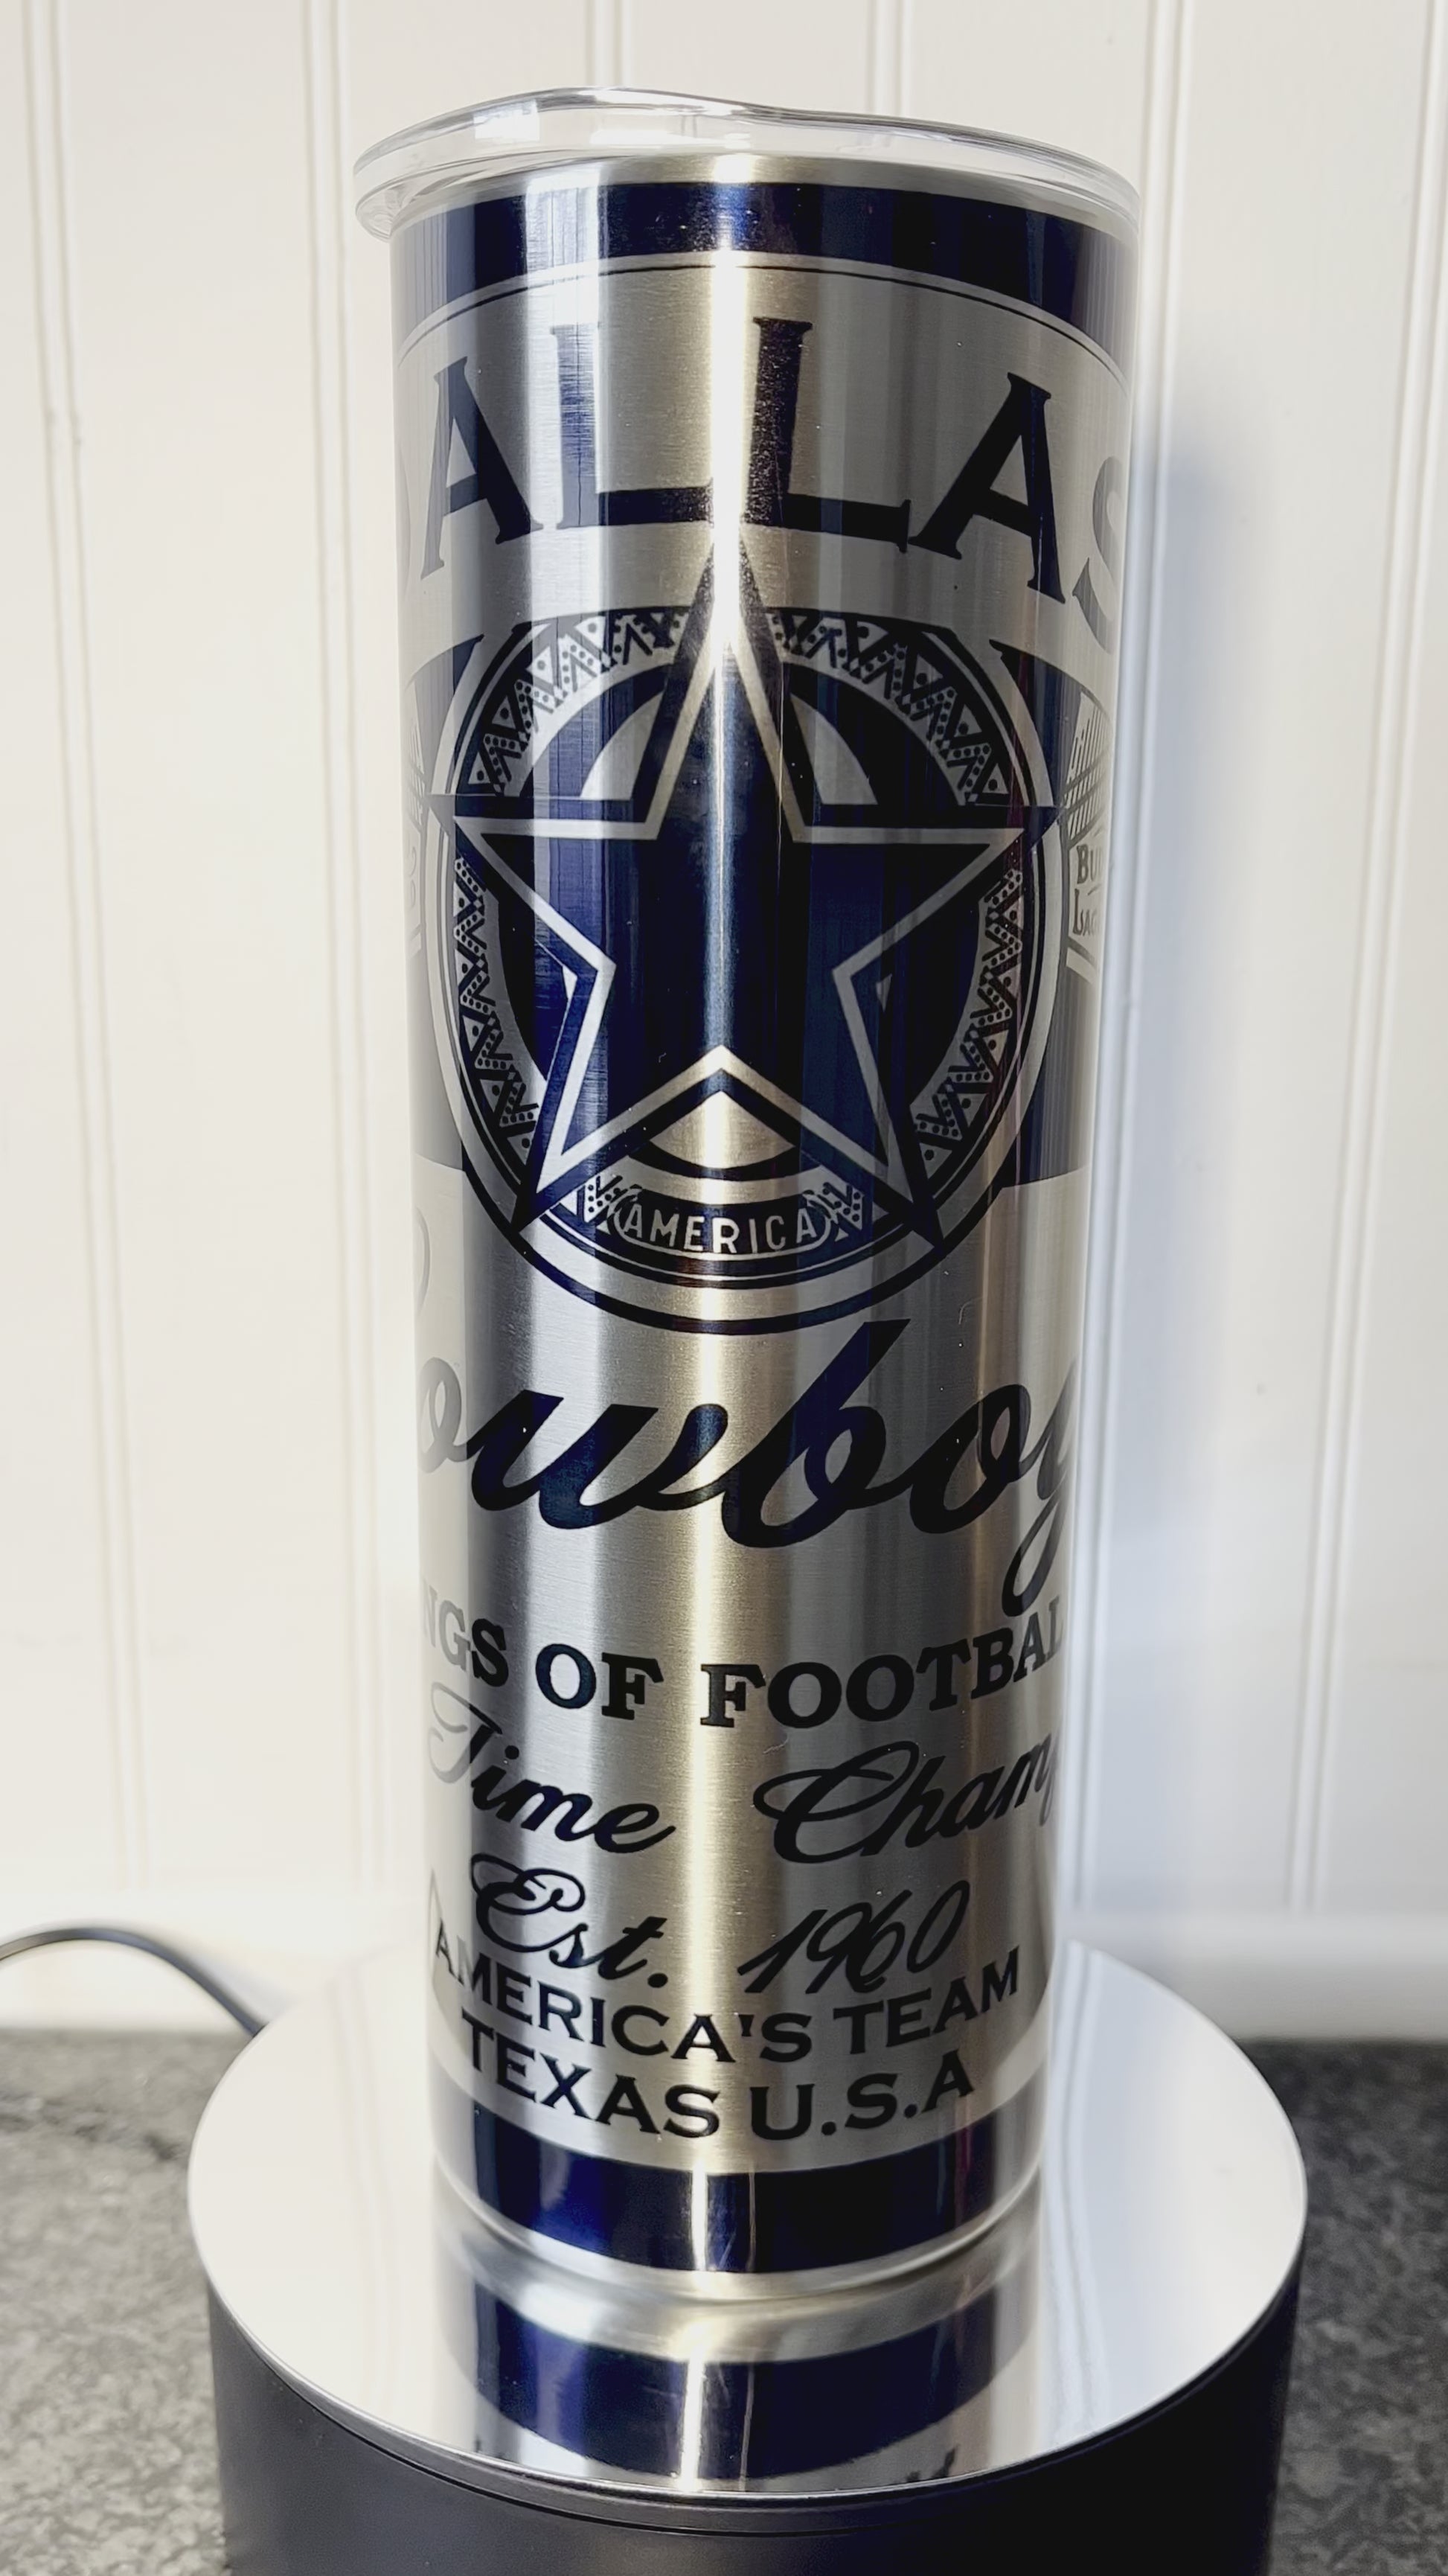 Dallas Cowboys NFL Team Color Insulated Stainless Steel Mug